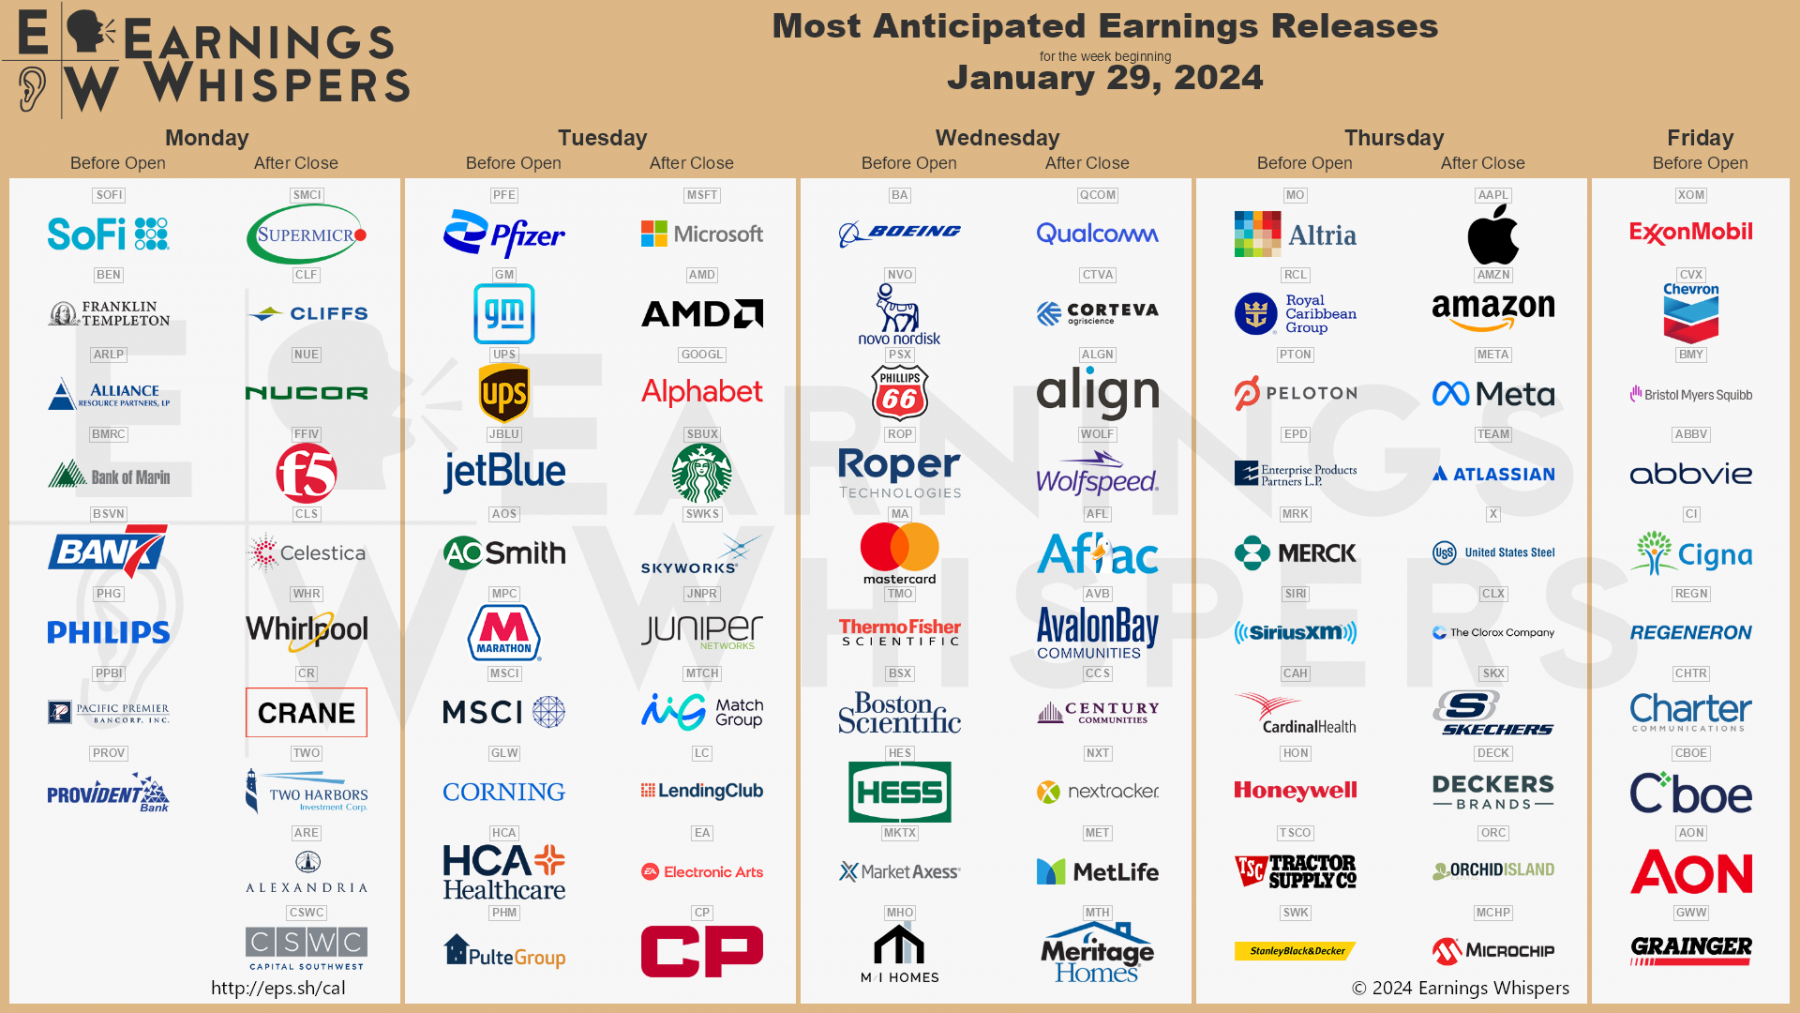 most-anticipated-earnings-releases-for-the-week-of-january-v0-xp2pokcl3mec1.png